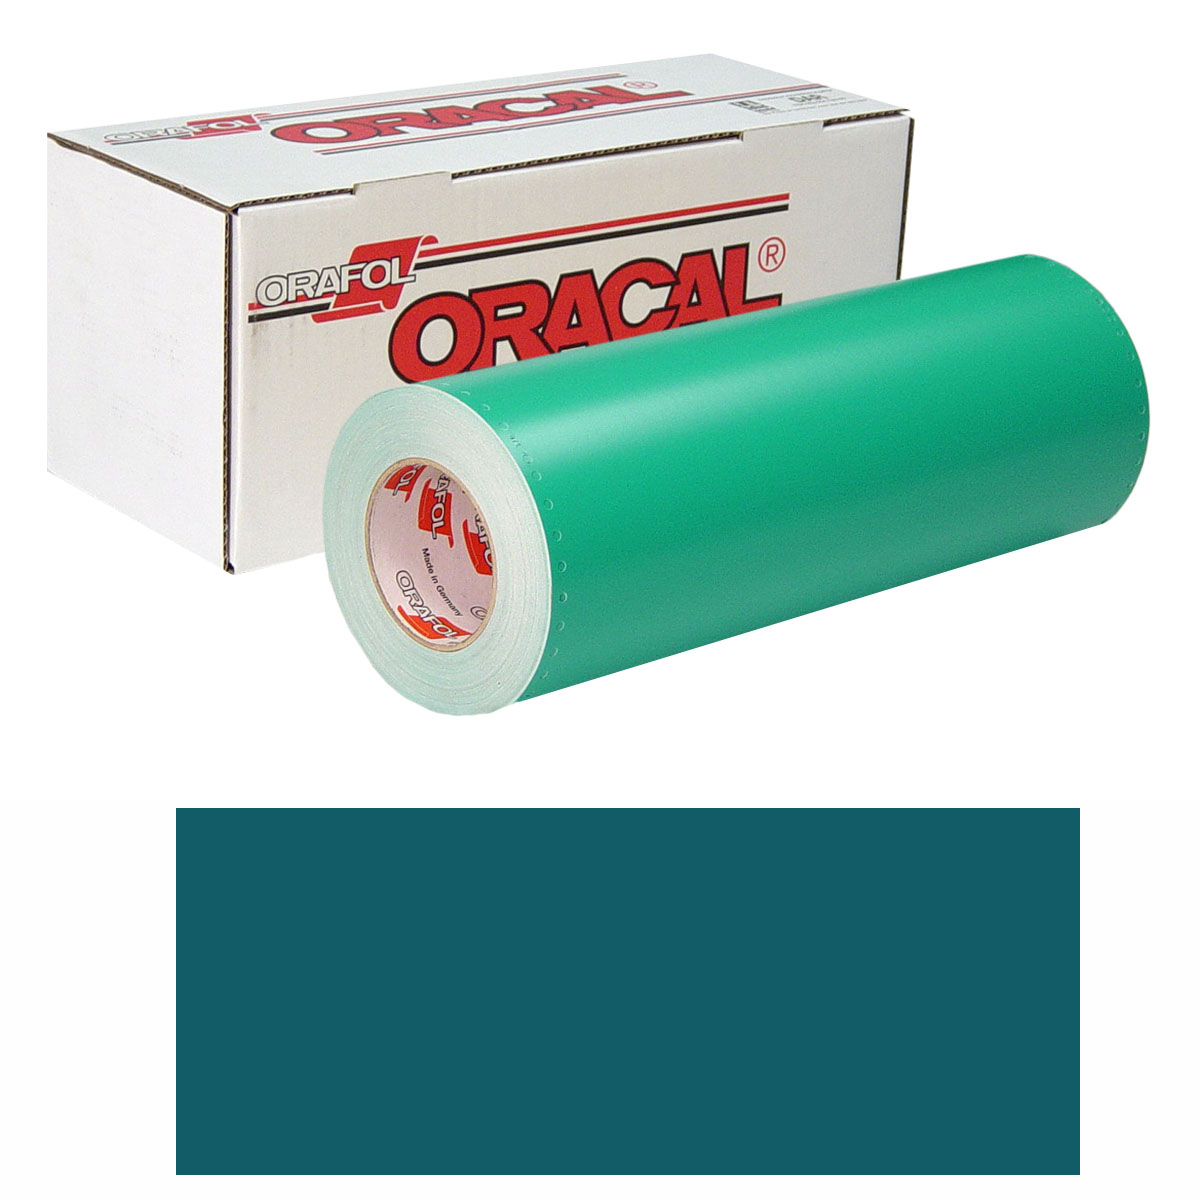 ORACAL 8500 15in X 10yd 541 Dark Turquoise